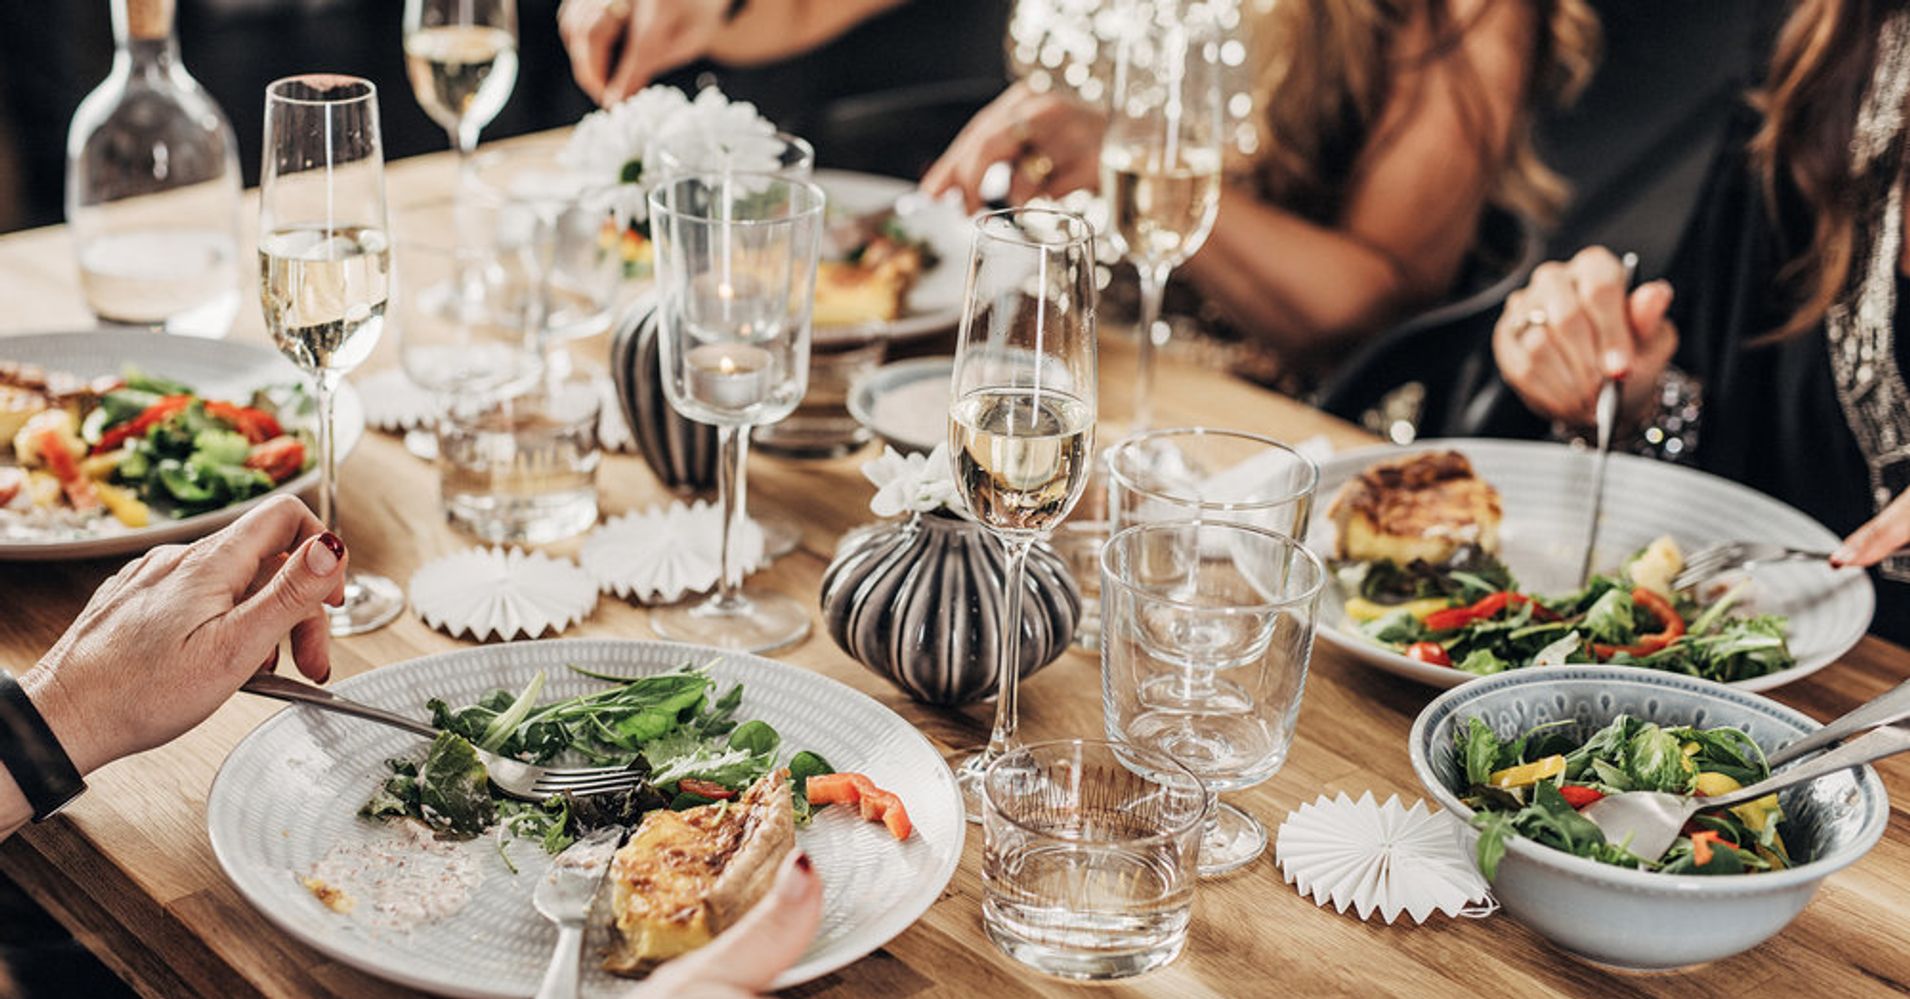 How To Host A Dinner Party With Dietary Restrictions | HuffPost